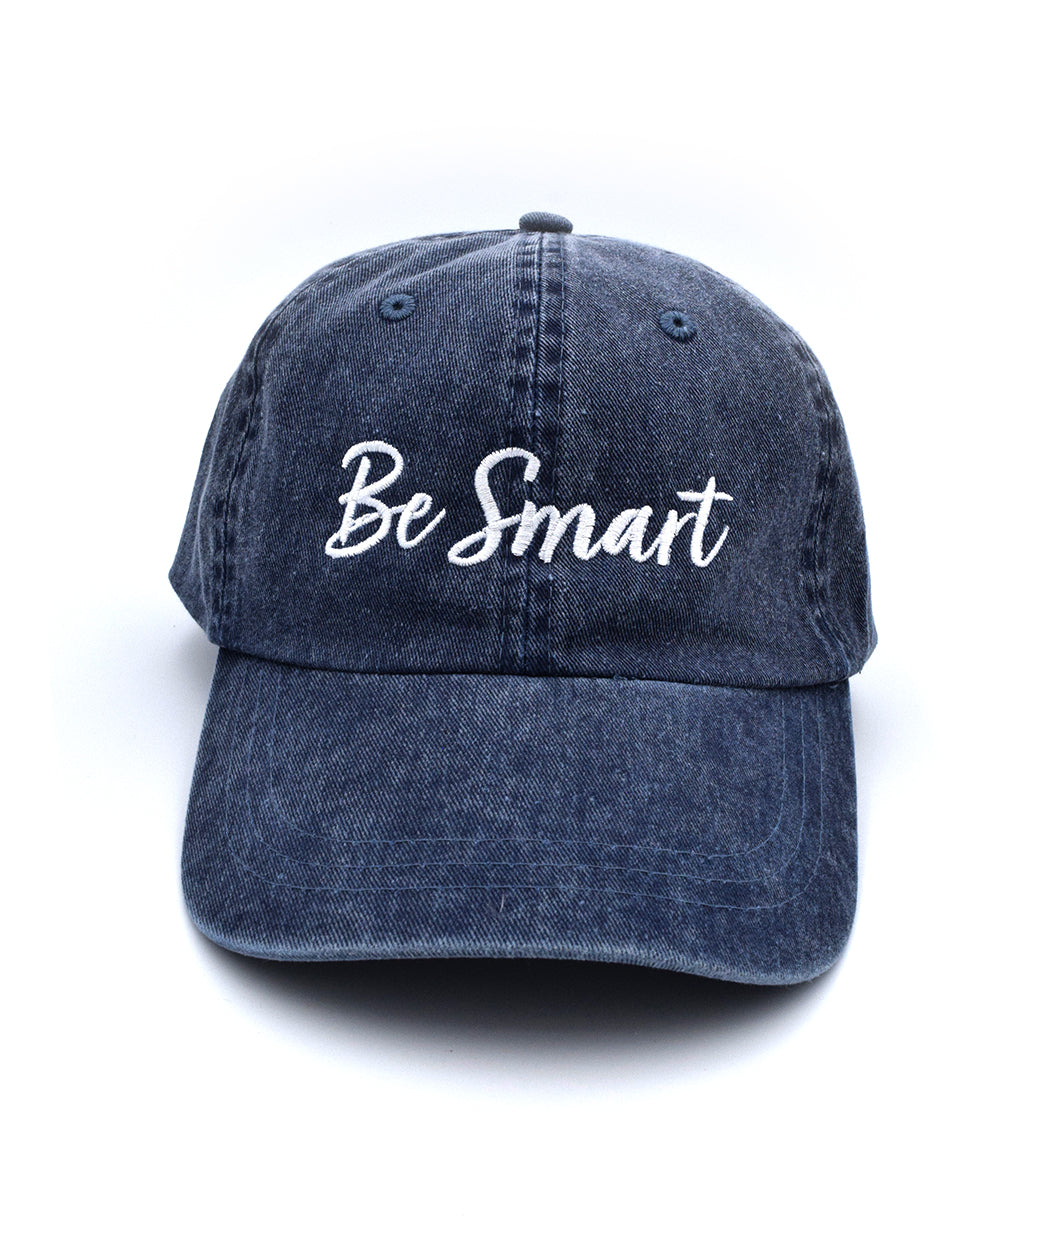 Blue denim hat with “Be Smart” in white cursive font on the front - from It’s Okay To Be Smart